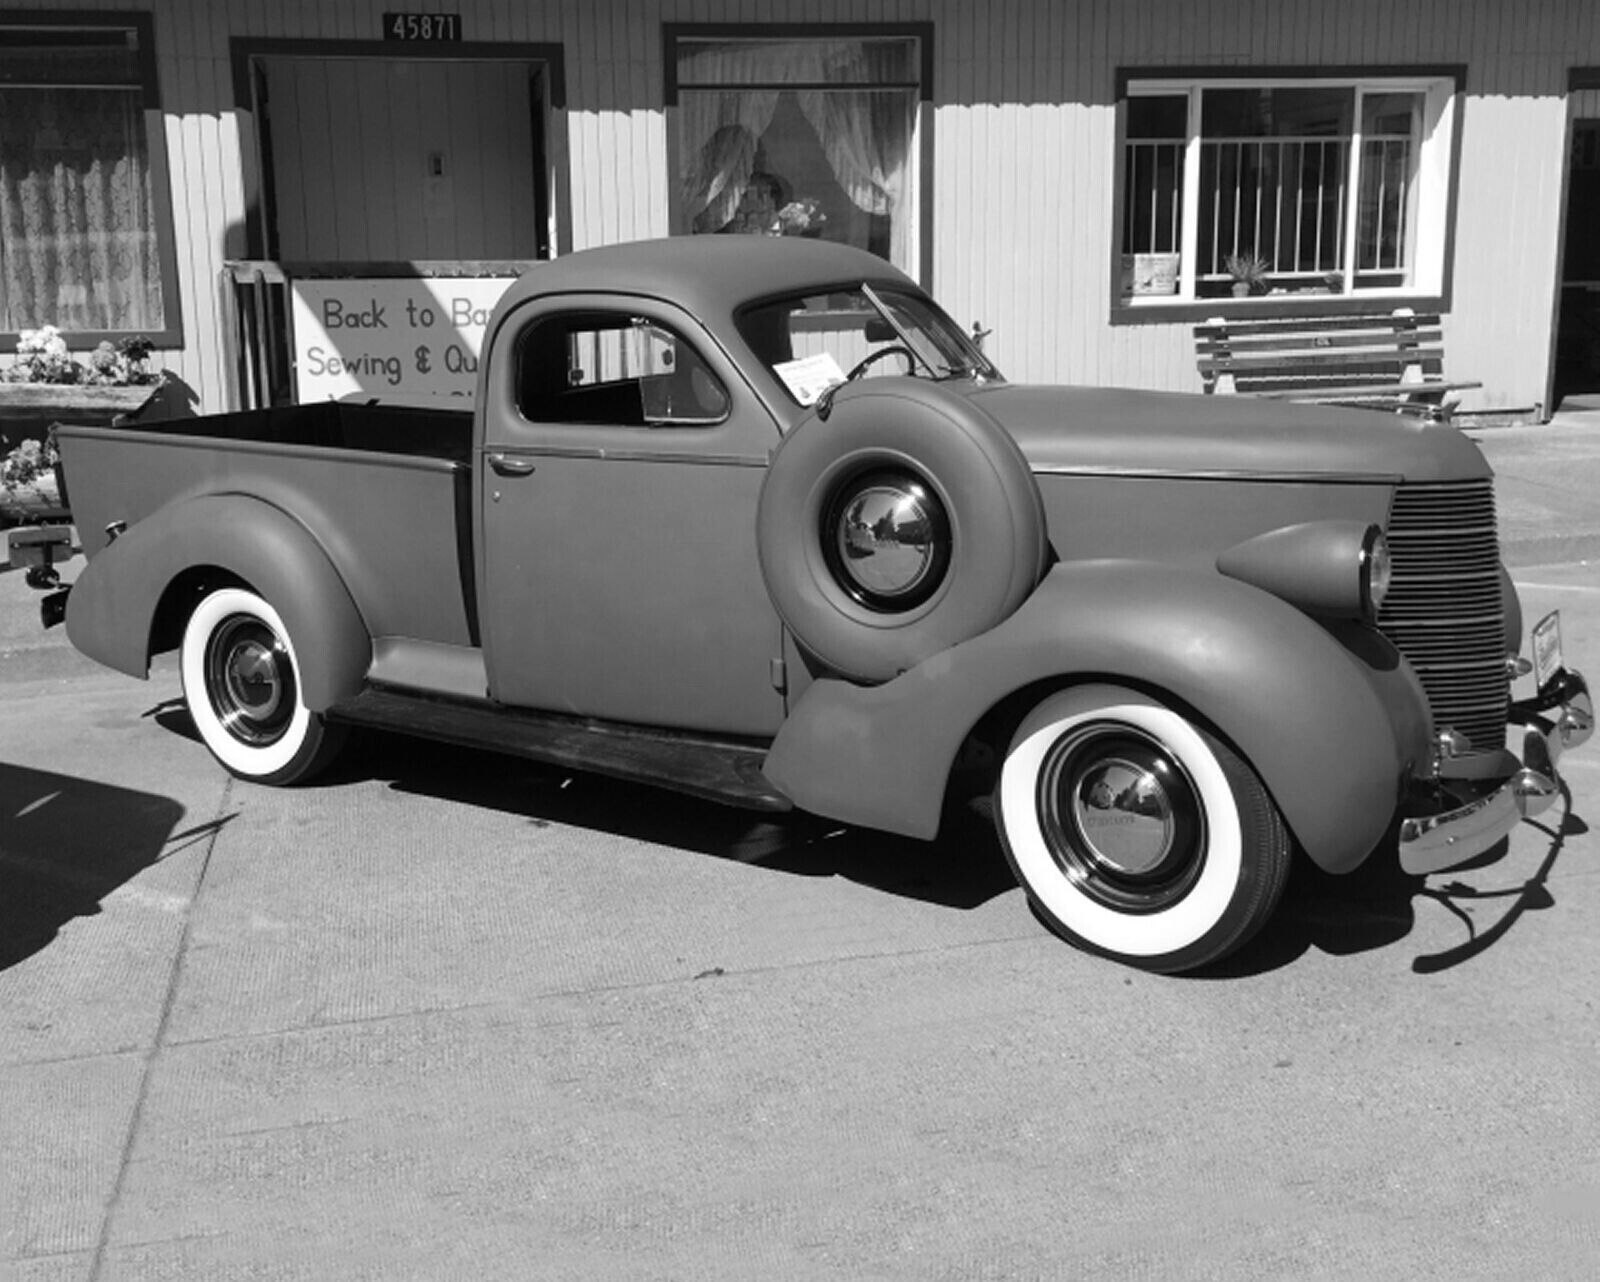 1938 STUDEBAKER Coupe Express PICKUP TRUCK Retro Classic Car Picture Photo 8x10